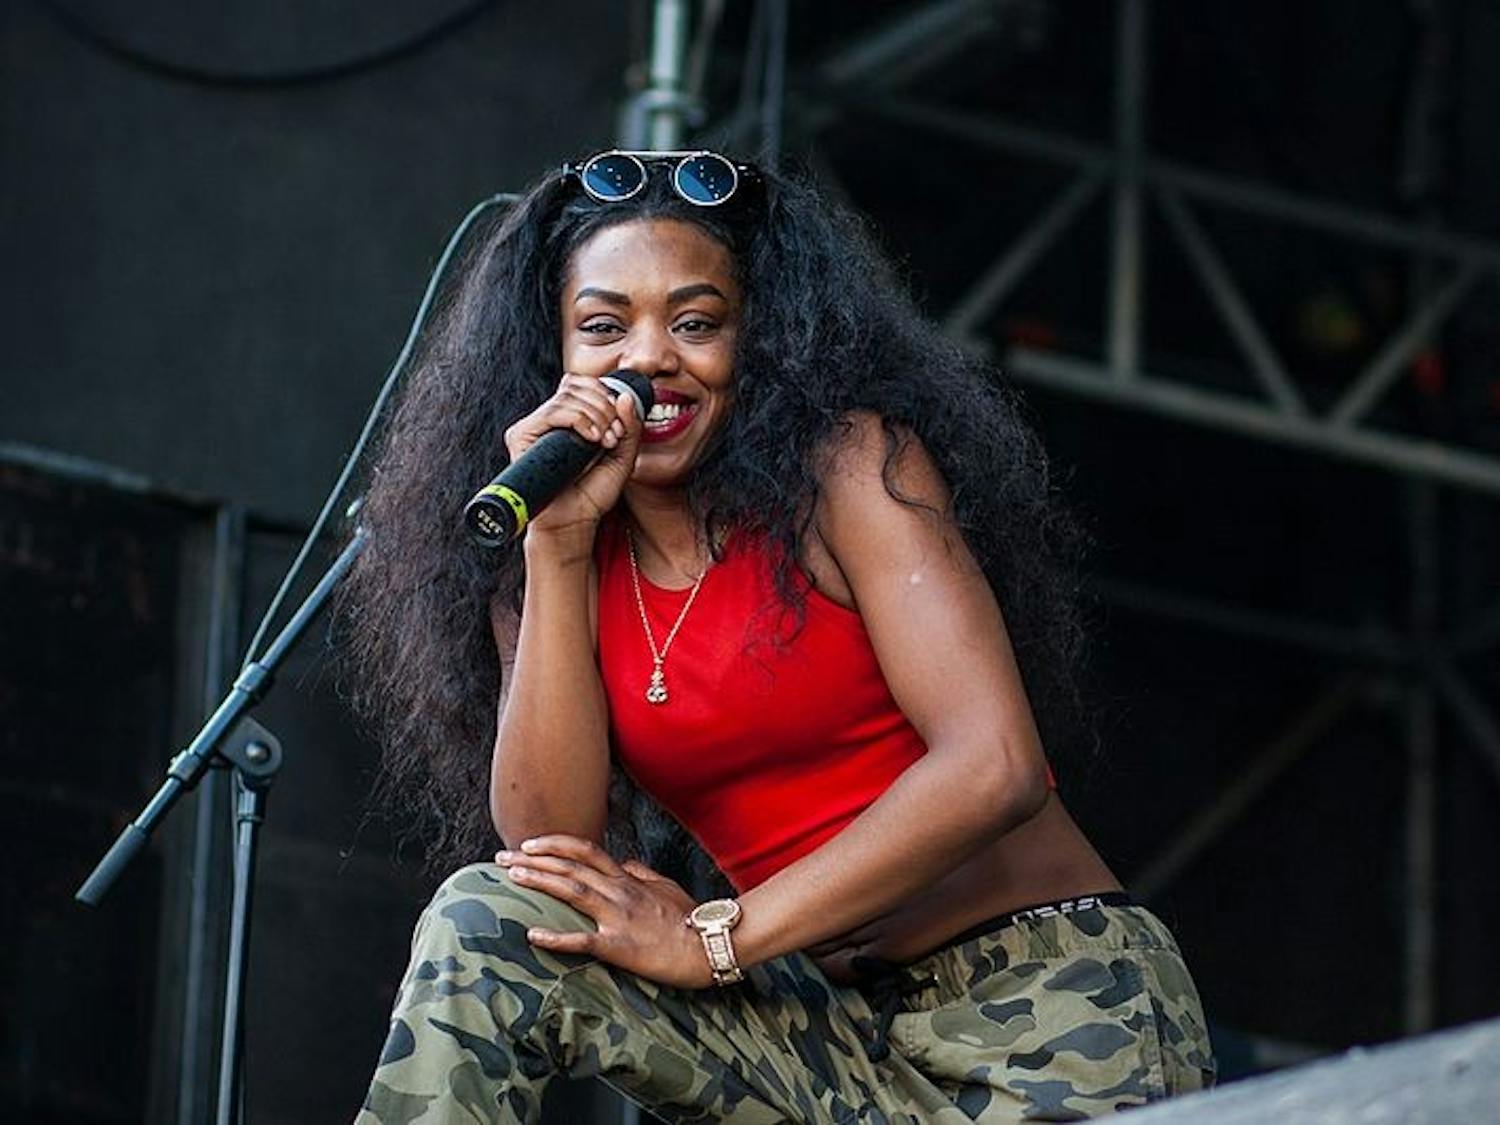 Lady Leshurr, known for her "Queen's Speech" freestyle series, is one of many standout female emcees in the modern hip-hop scene.